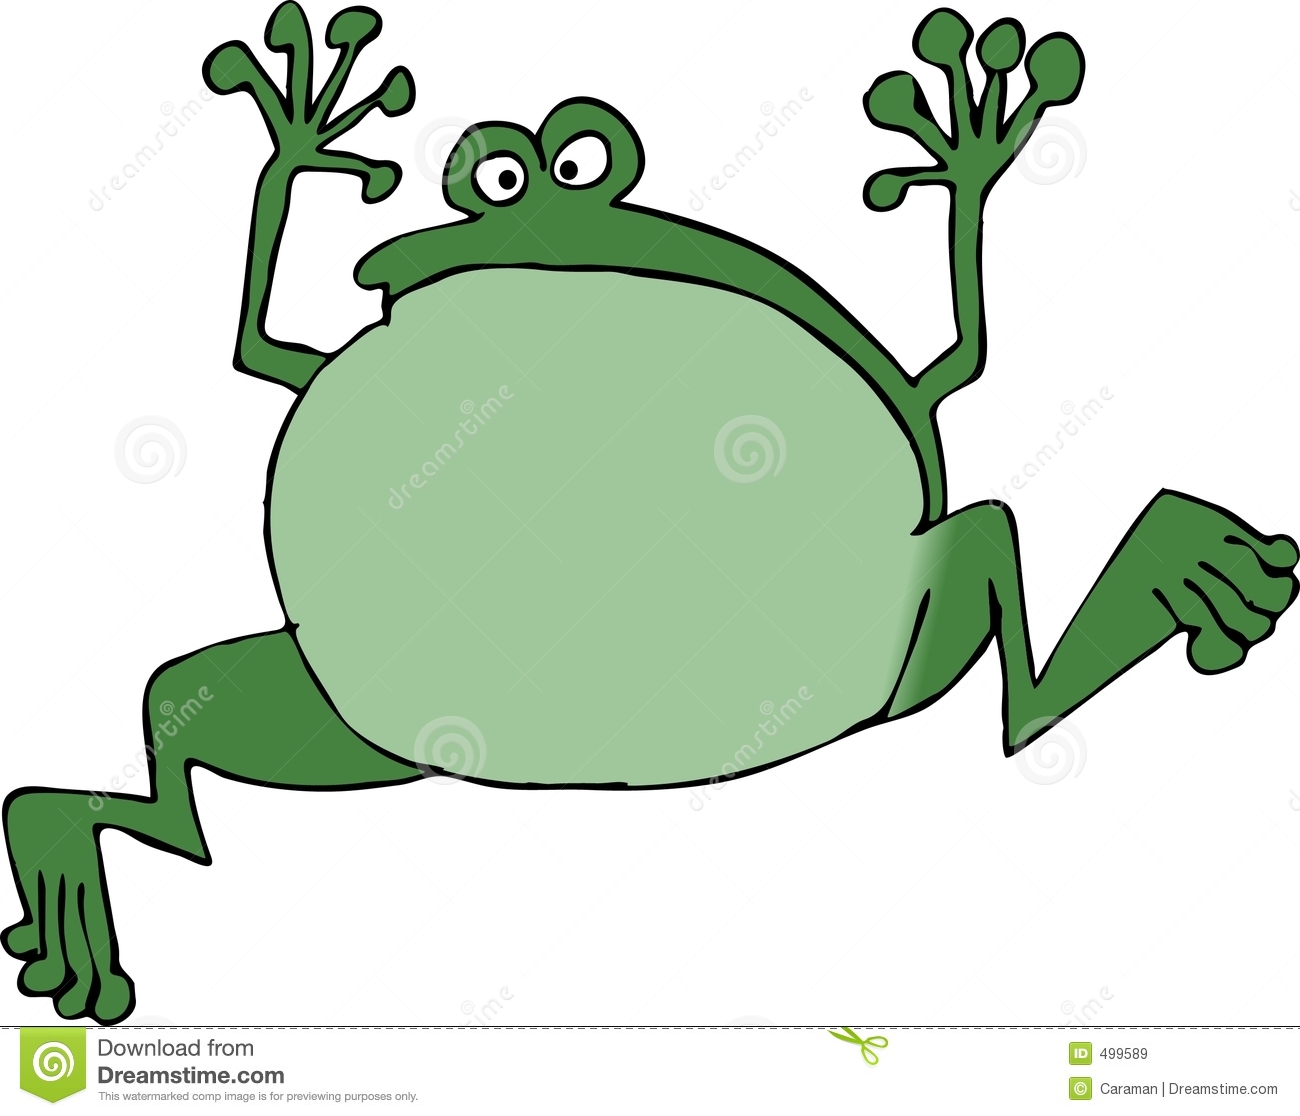 Jumping Frog Clip Art   Clipart Panda   Free Clipart Images